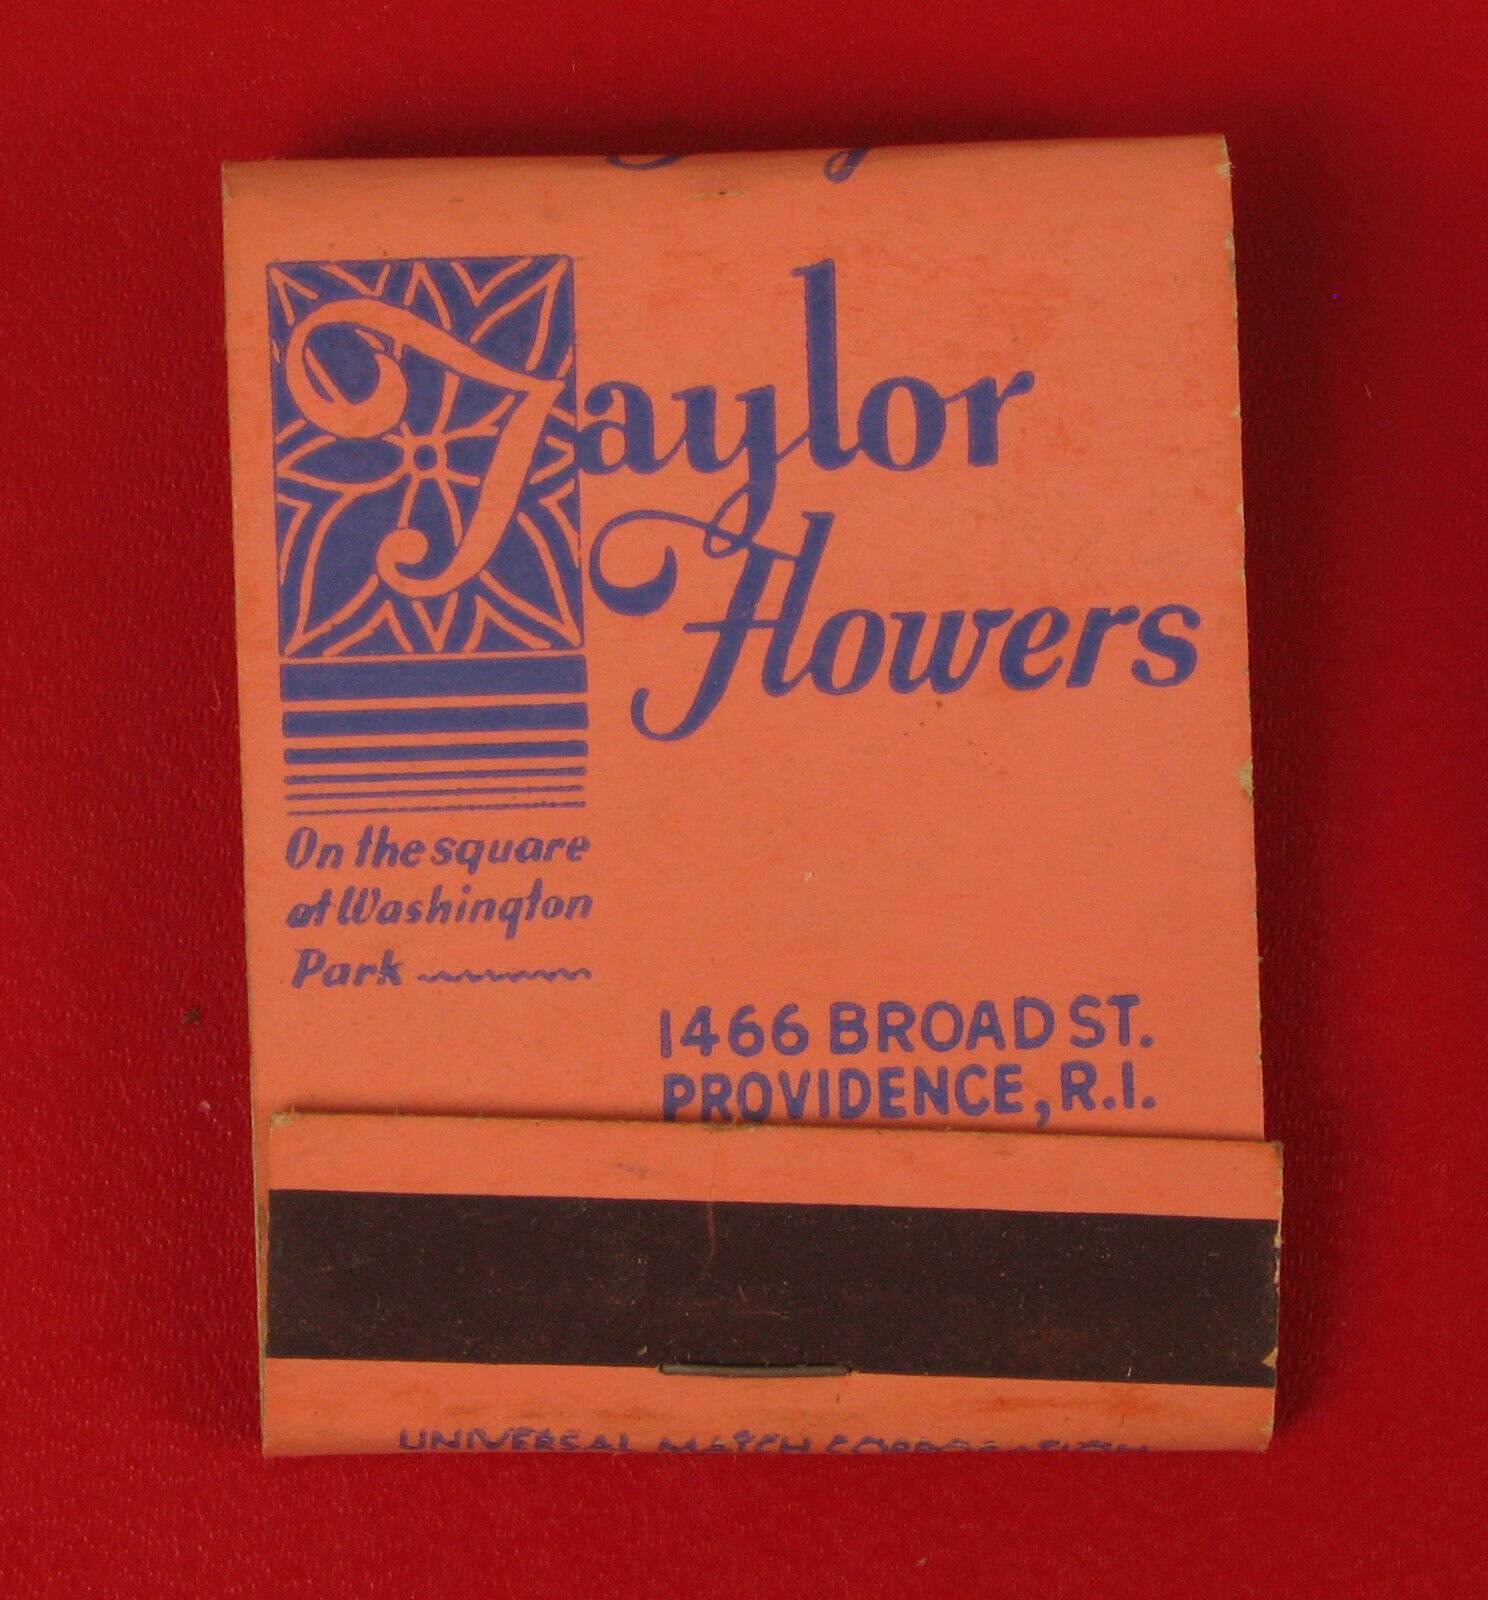 VINTAGE HERB TAYLOR FLOWERS PROVIDENCE RI ROSES ADVERTISING MATCHBOOK MATCHES 